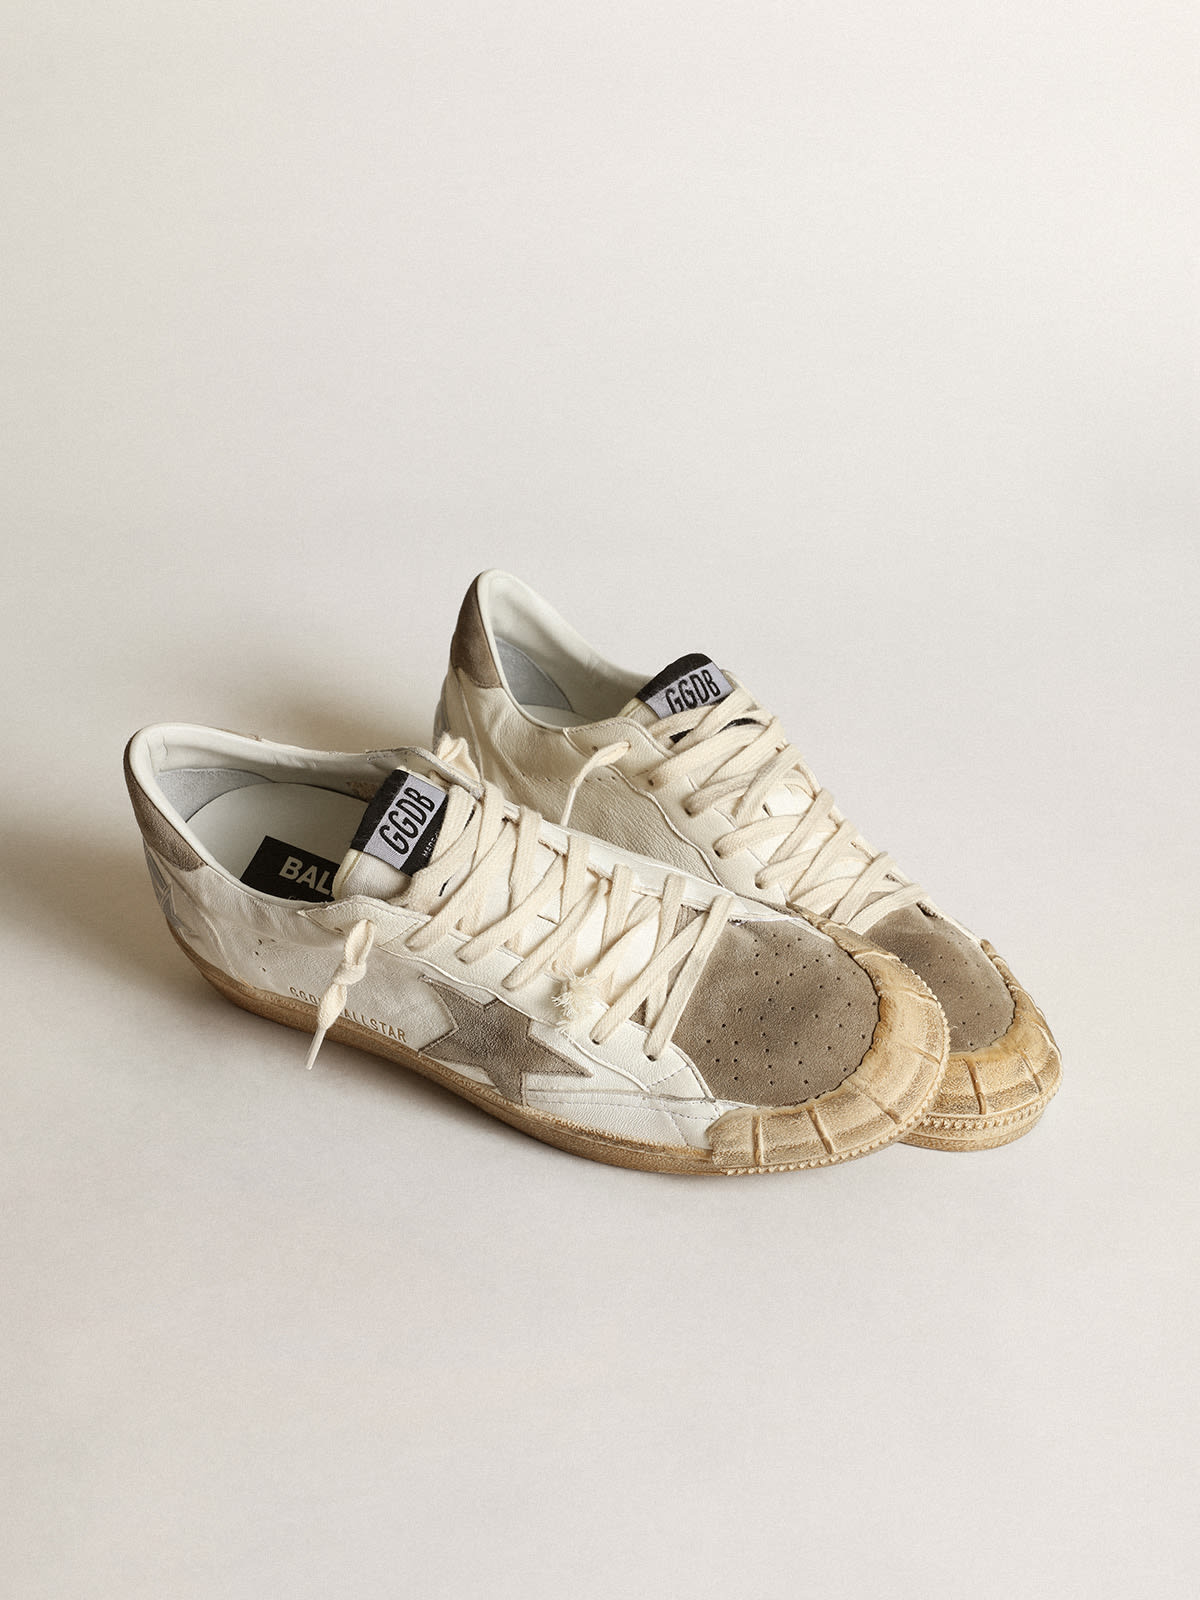 Golden Goose - Men's Ball Star LTD sneakers in white nappa leather with dove-gray suede star and heel tab in 